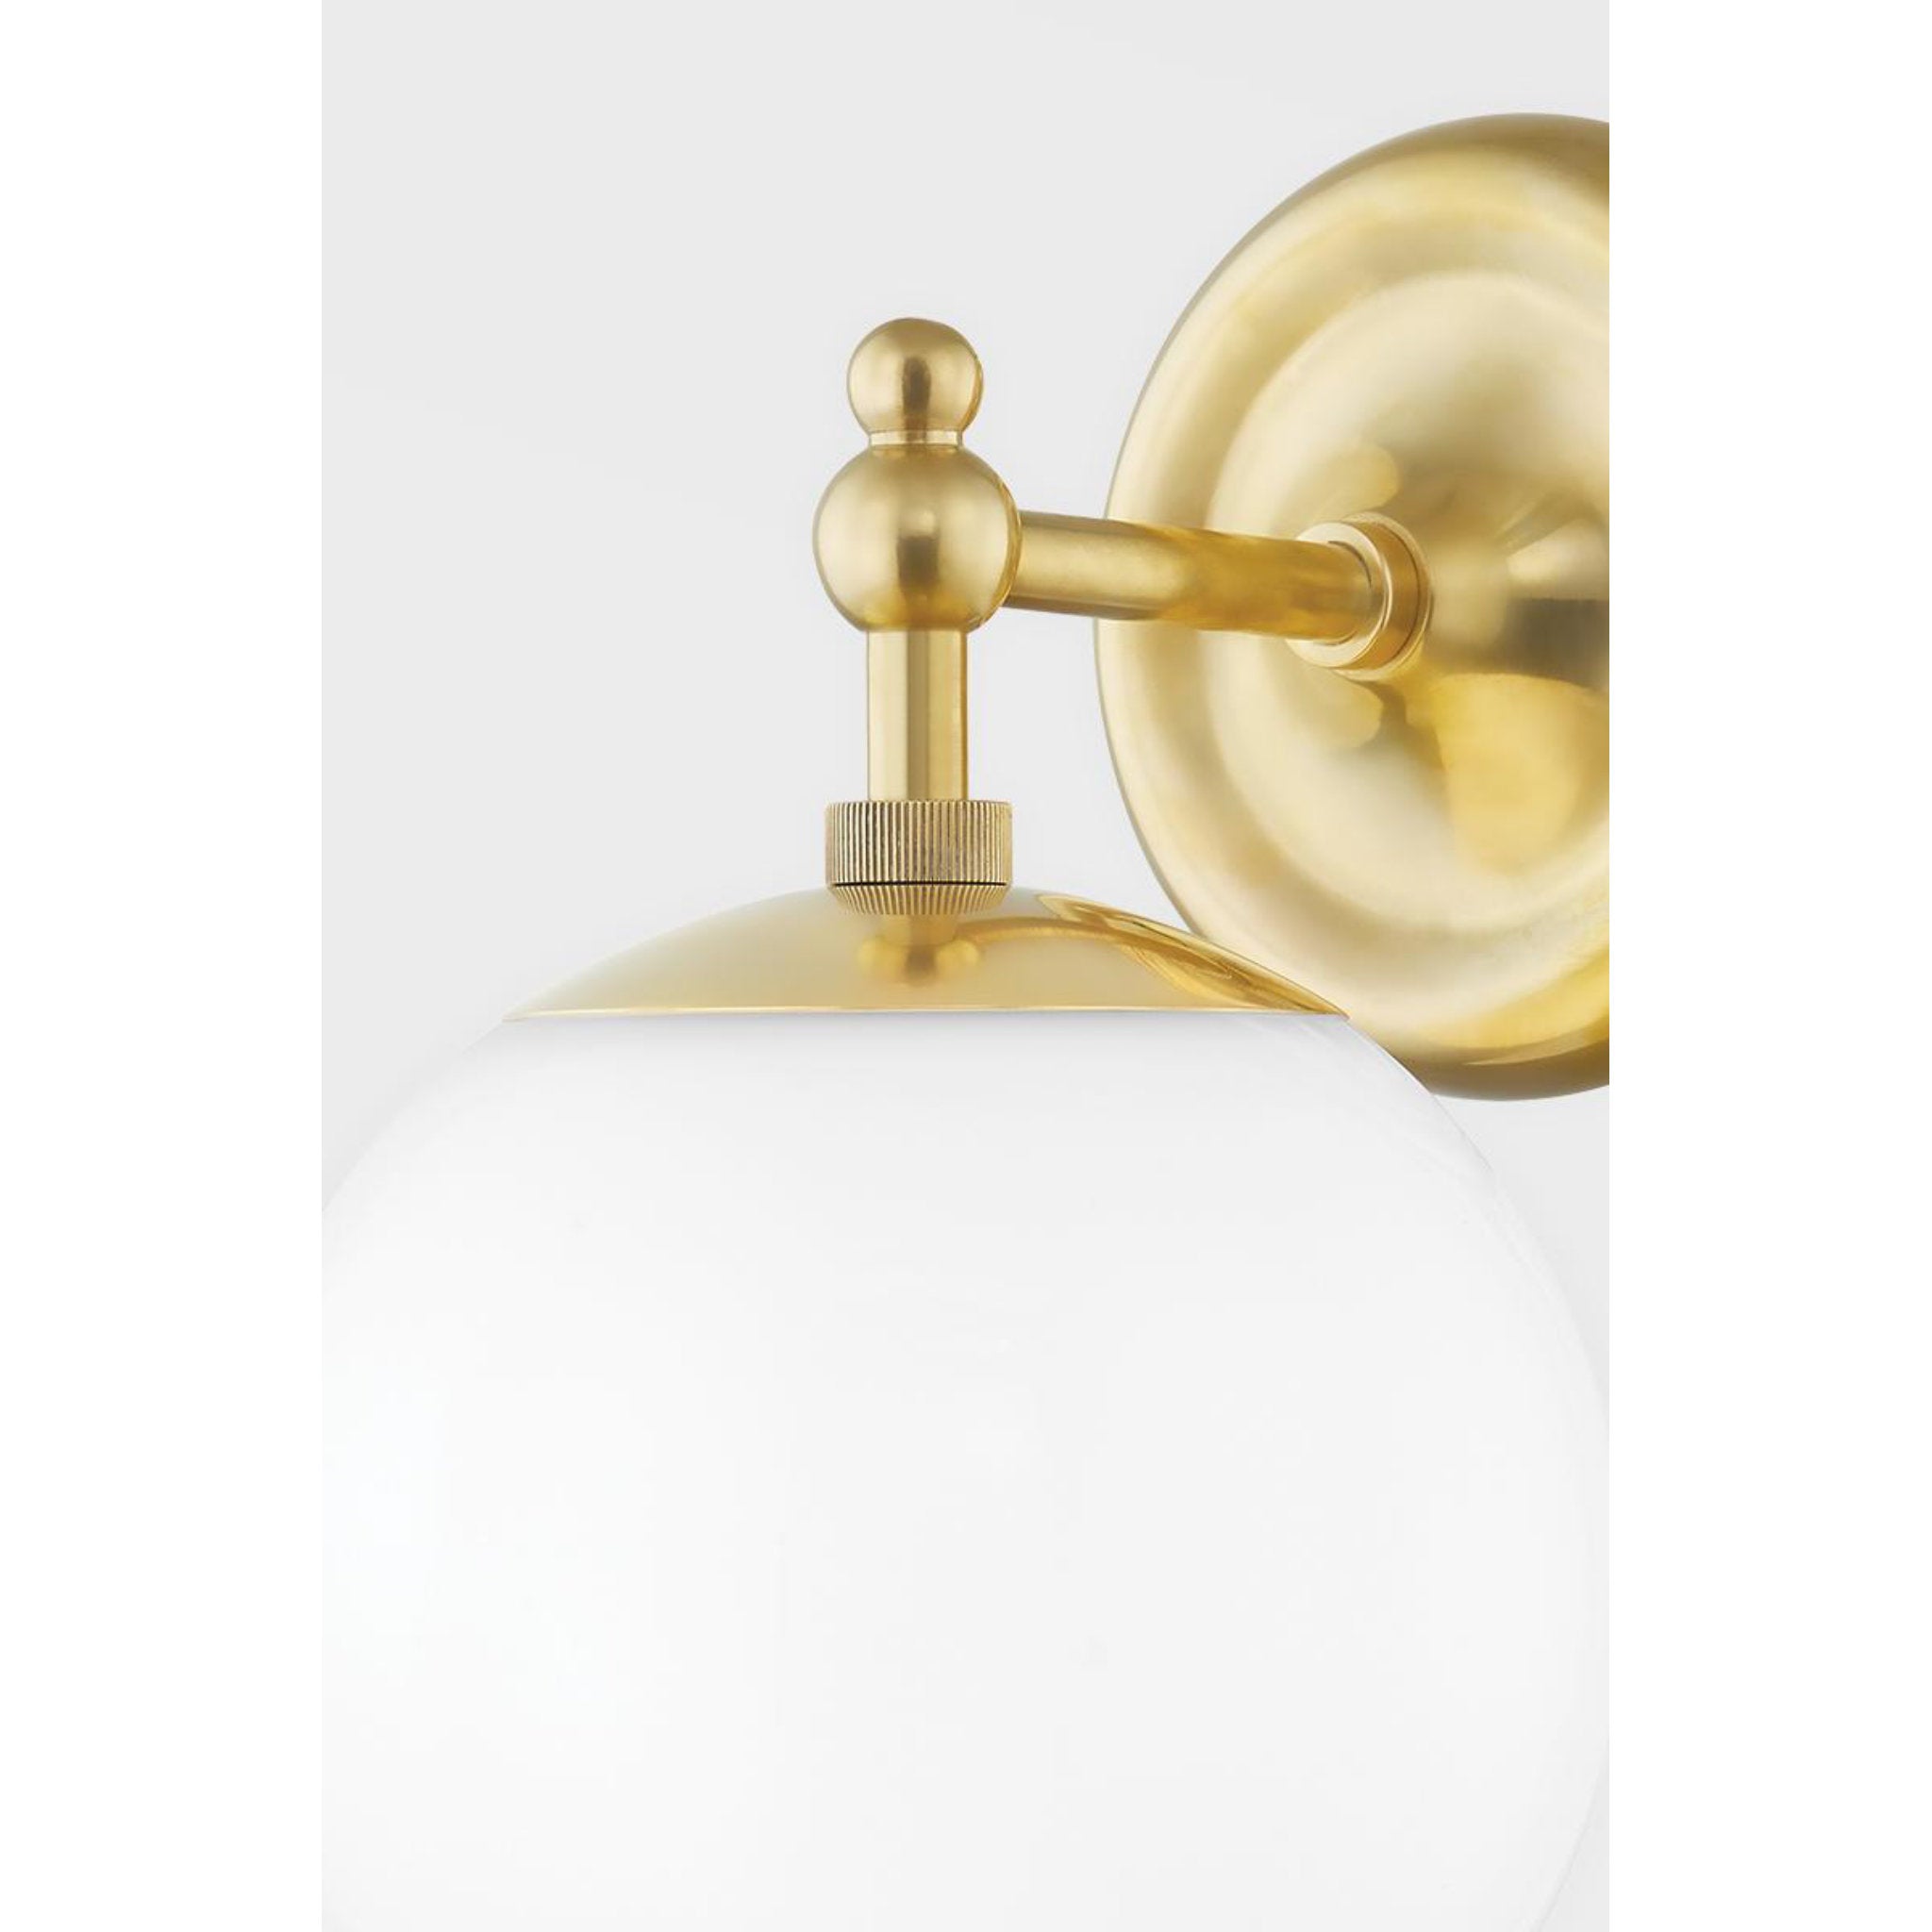 Sphere No.1 1 Light Wall Sconce in Polished Nickel by Mark D. Sikes